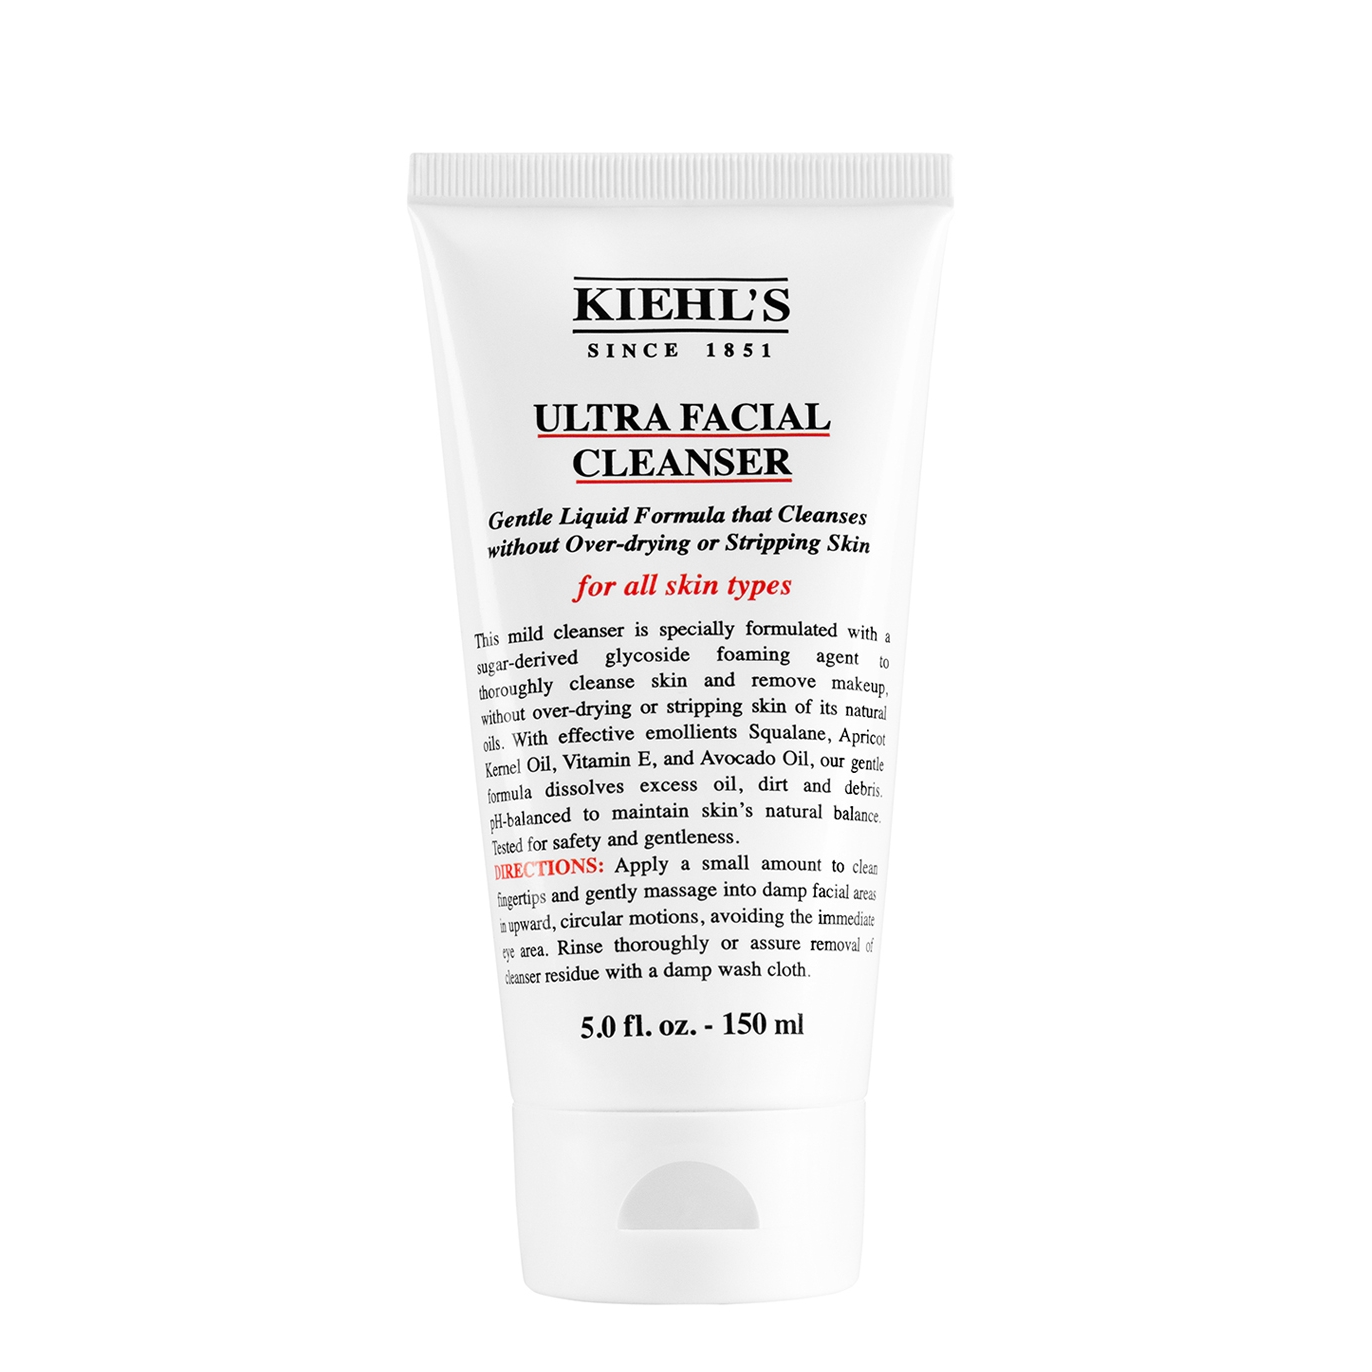 Kiehl's Ultra Facial Cleanser 150ml, Cleanses Skin and Removes Makeup